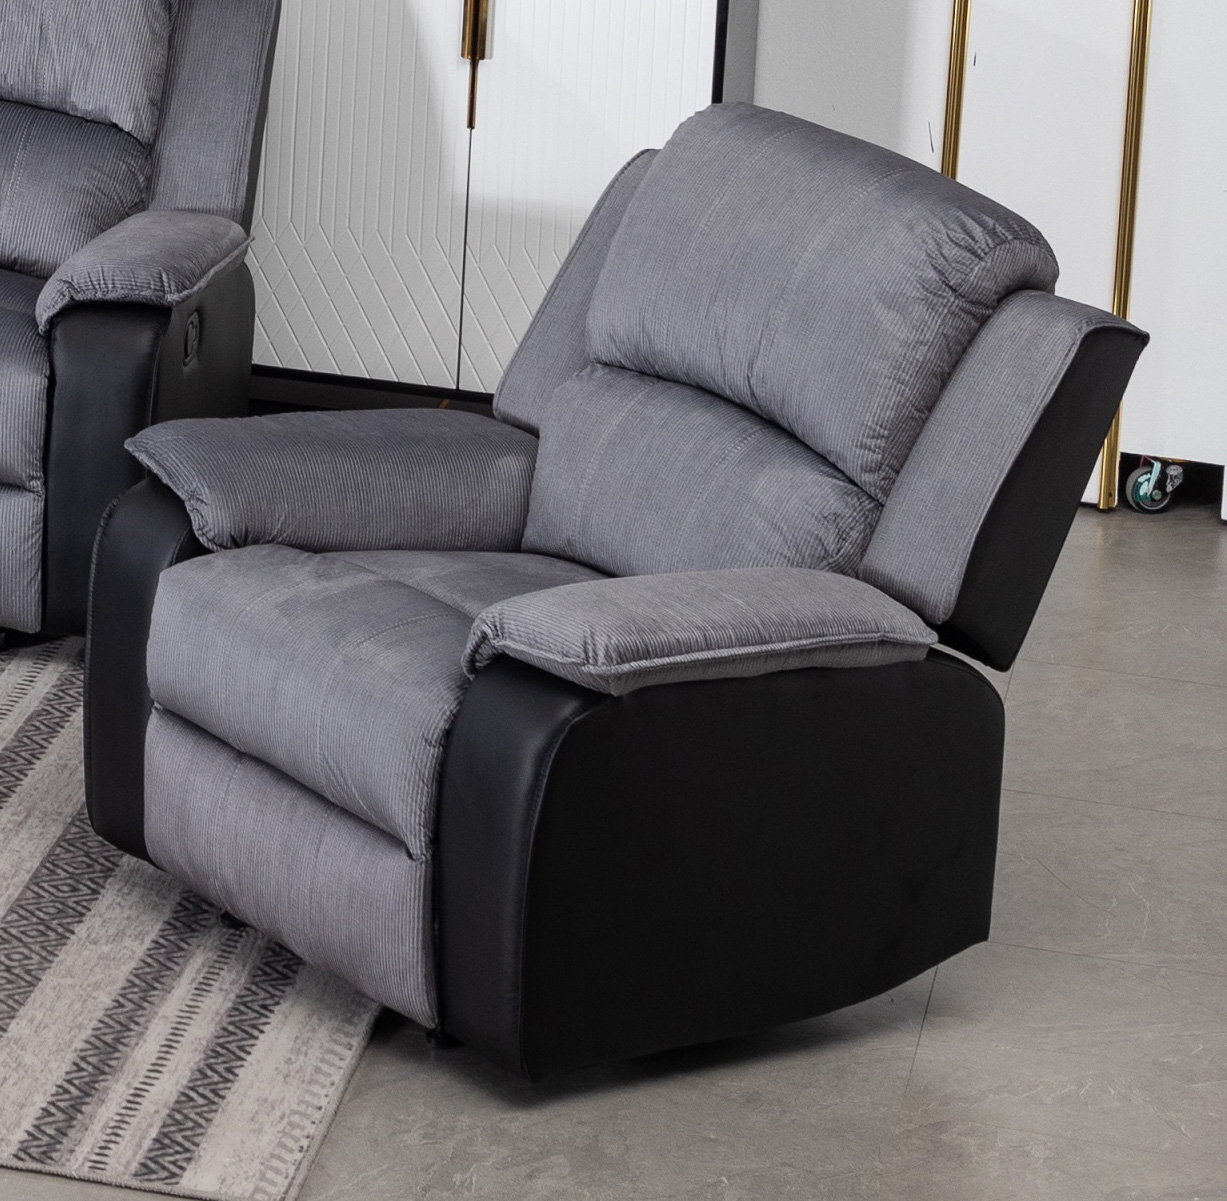 Earlsden Fabric And Pu Leather Recliner 1 Seater Sofa In Grey And Black